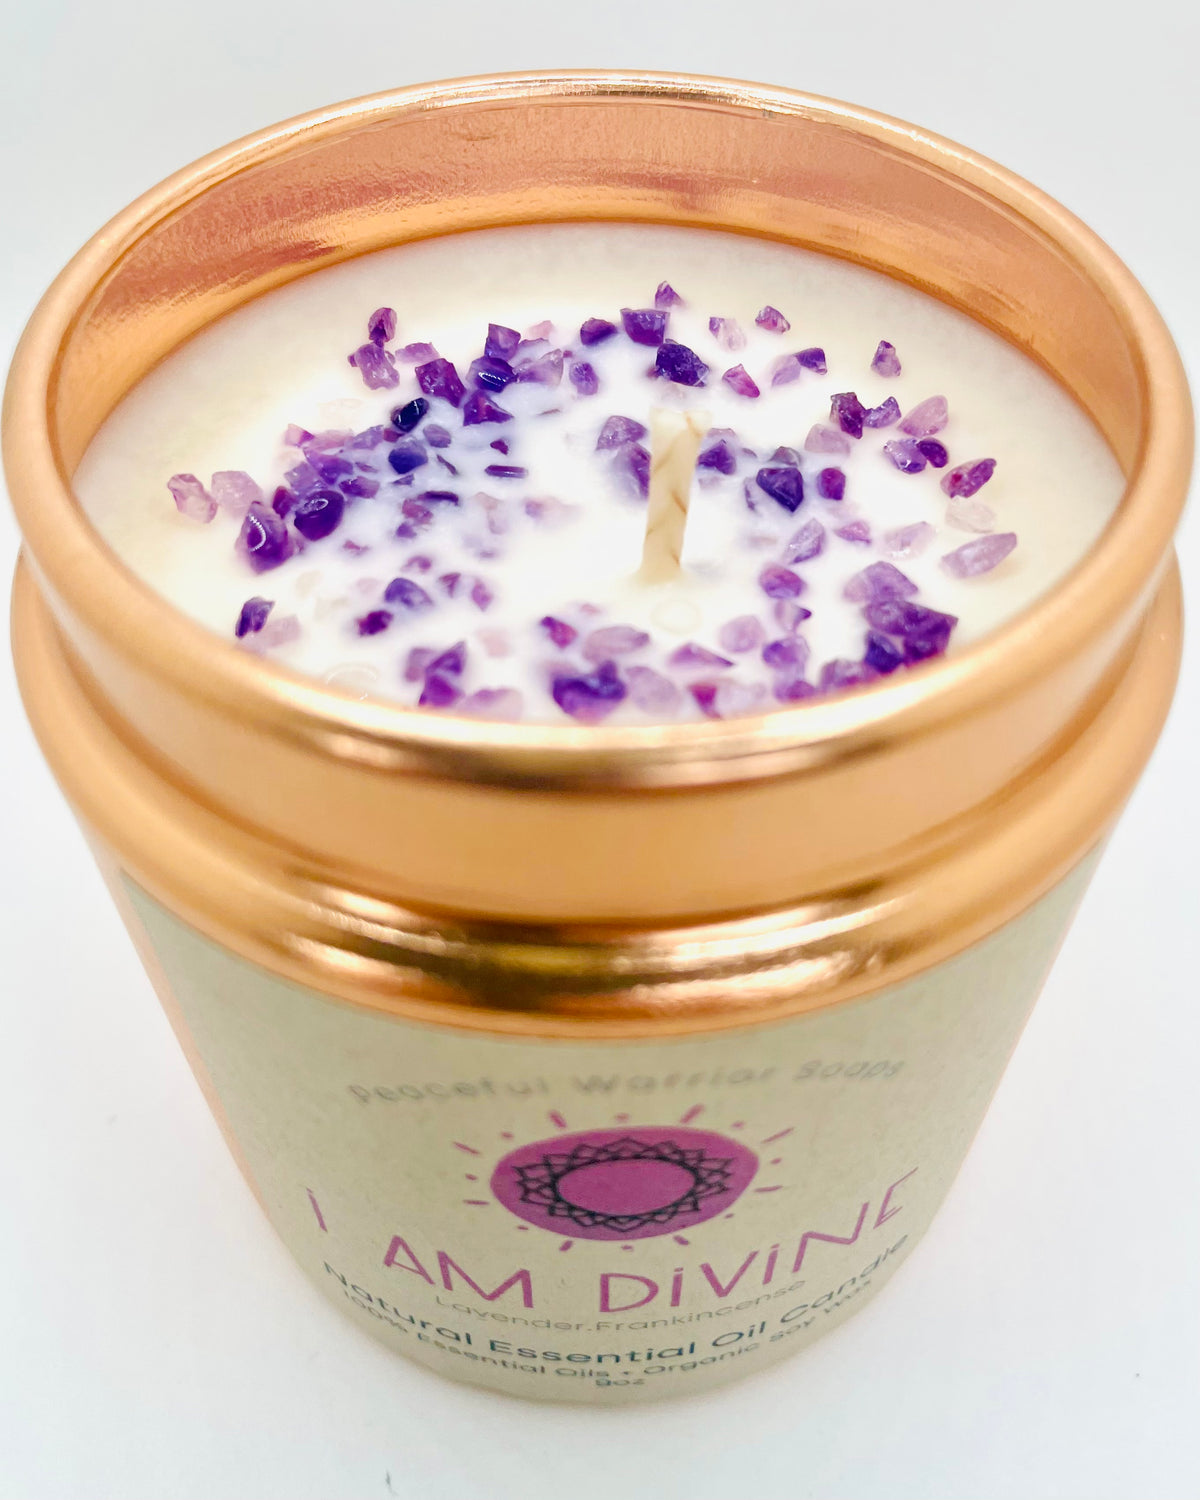 I am Divine Essential Oil Candle with Amethyst